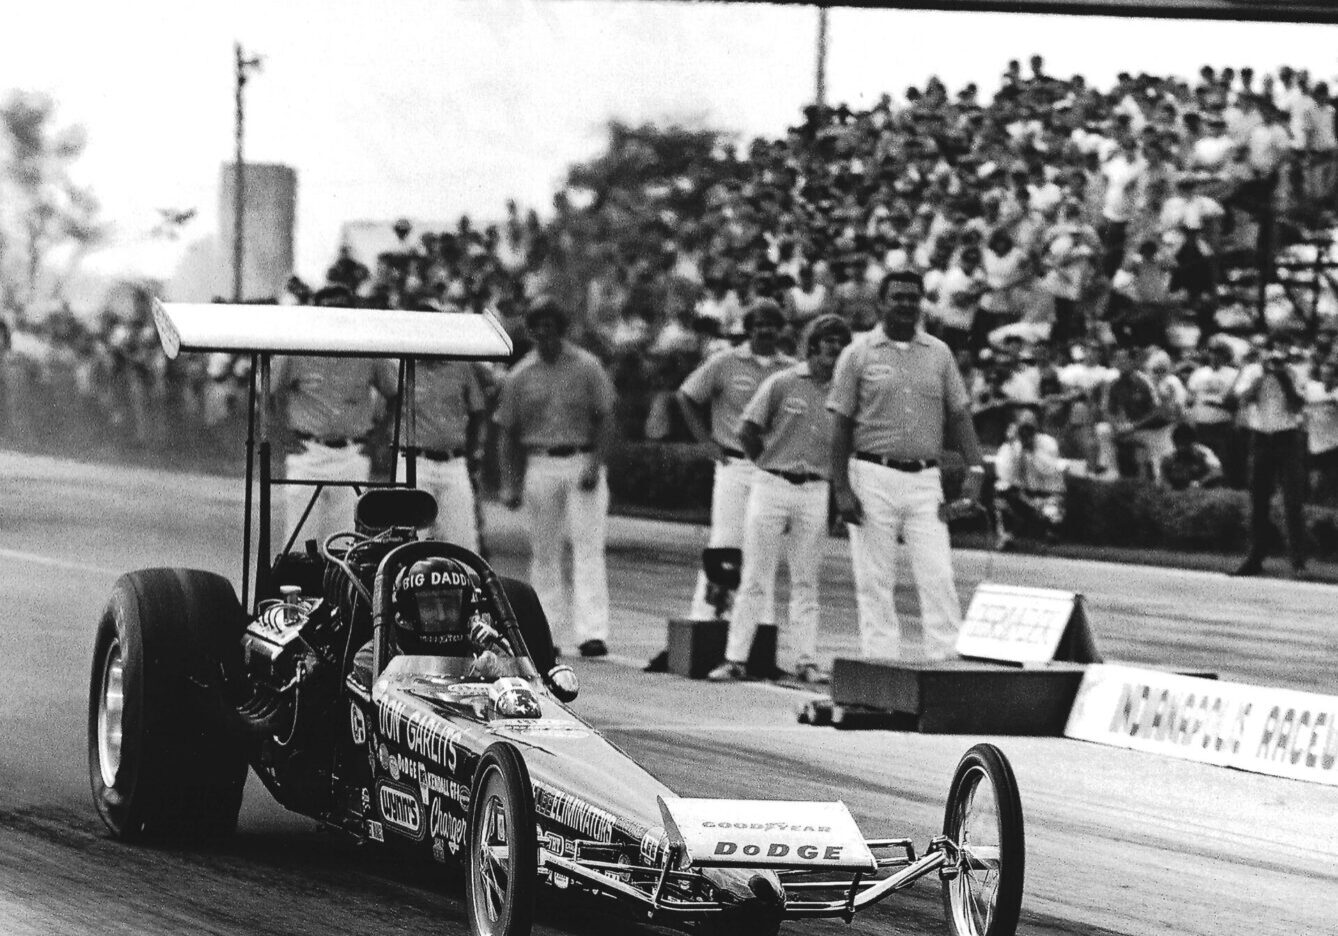 An old photo capturing the essence of drag racing as a man fearlessly drives his drag car.